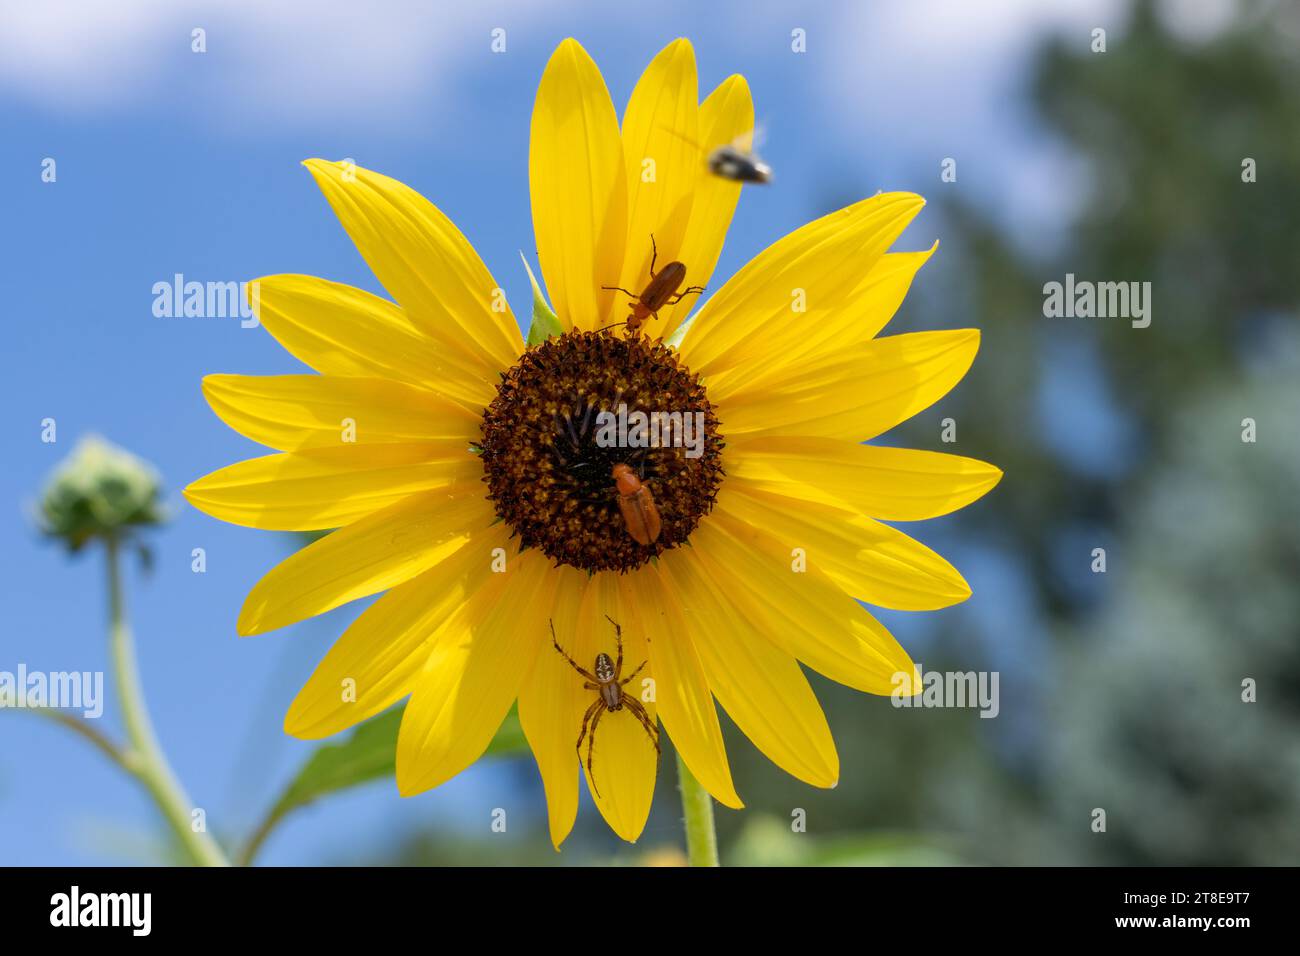 A Western Spotted Orbweaver, Neoscona oaxacensis, and two blister beetles on a Common Sunflower in Utah. Stock Photo